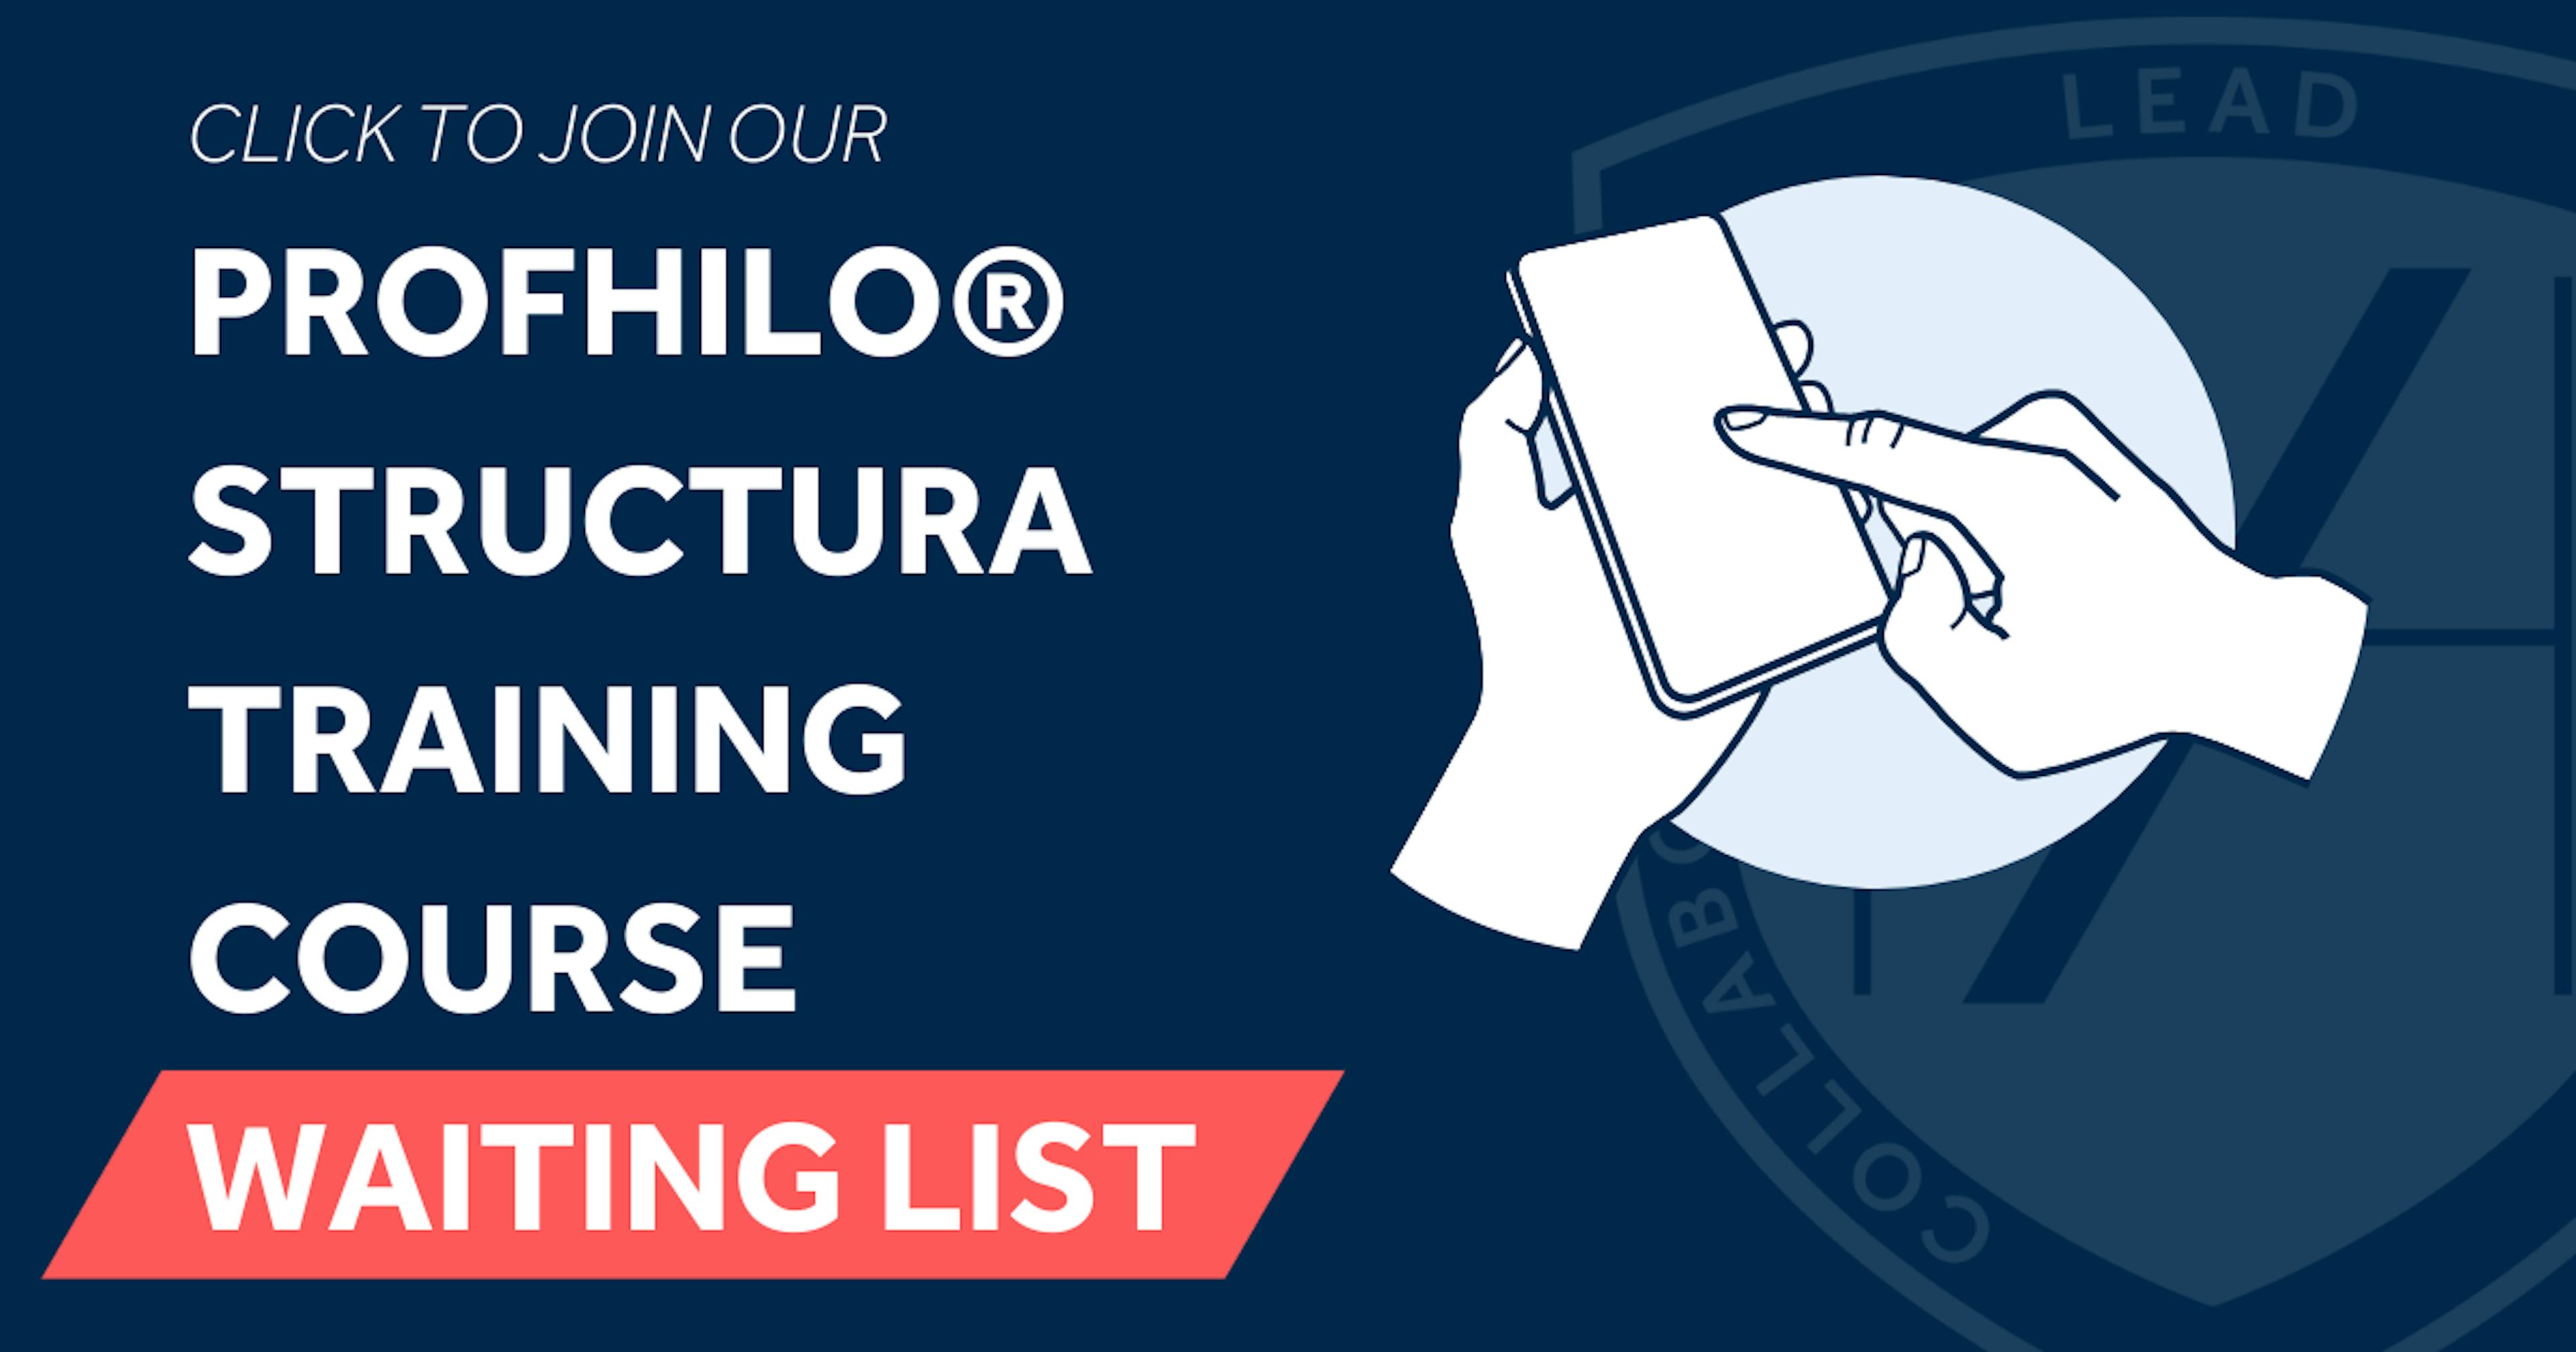 profhilo structura training course waiting list